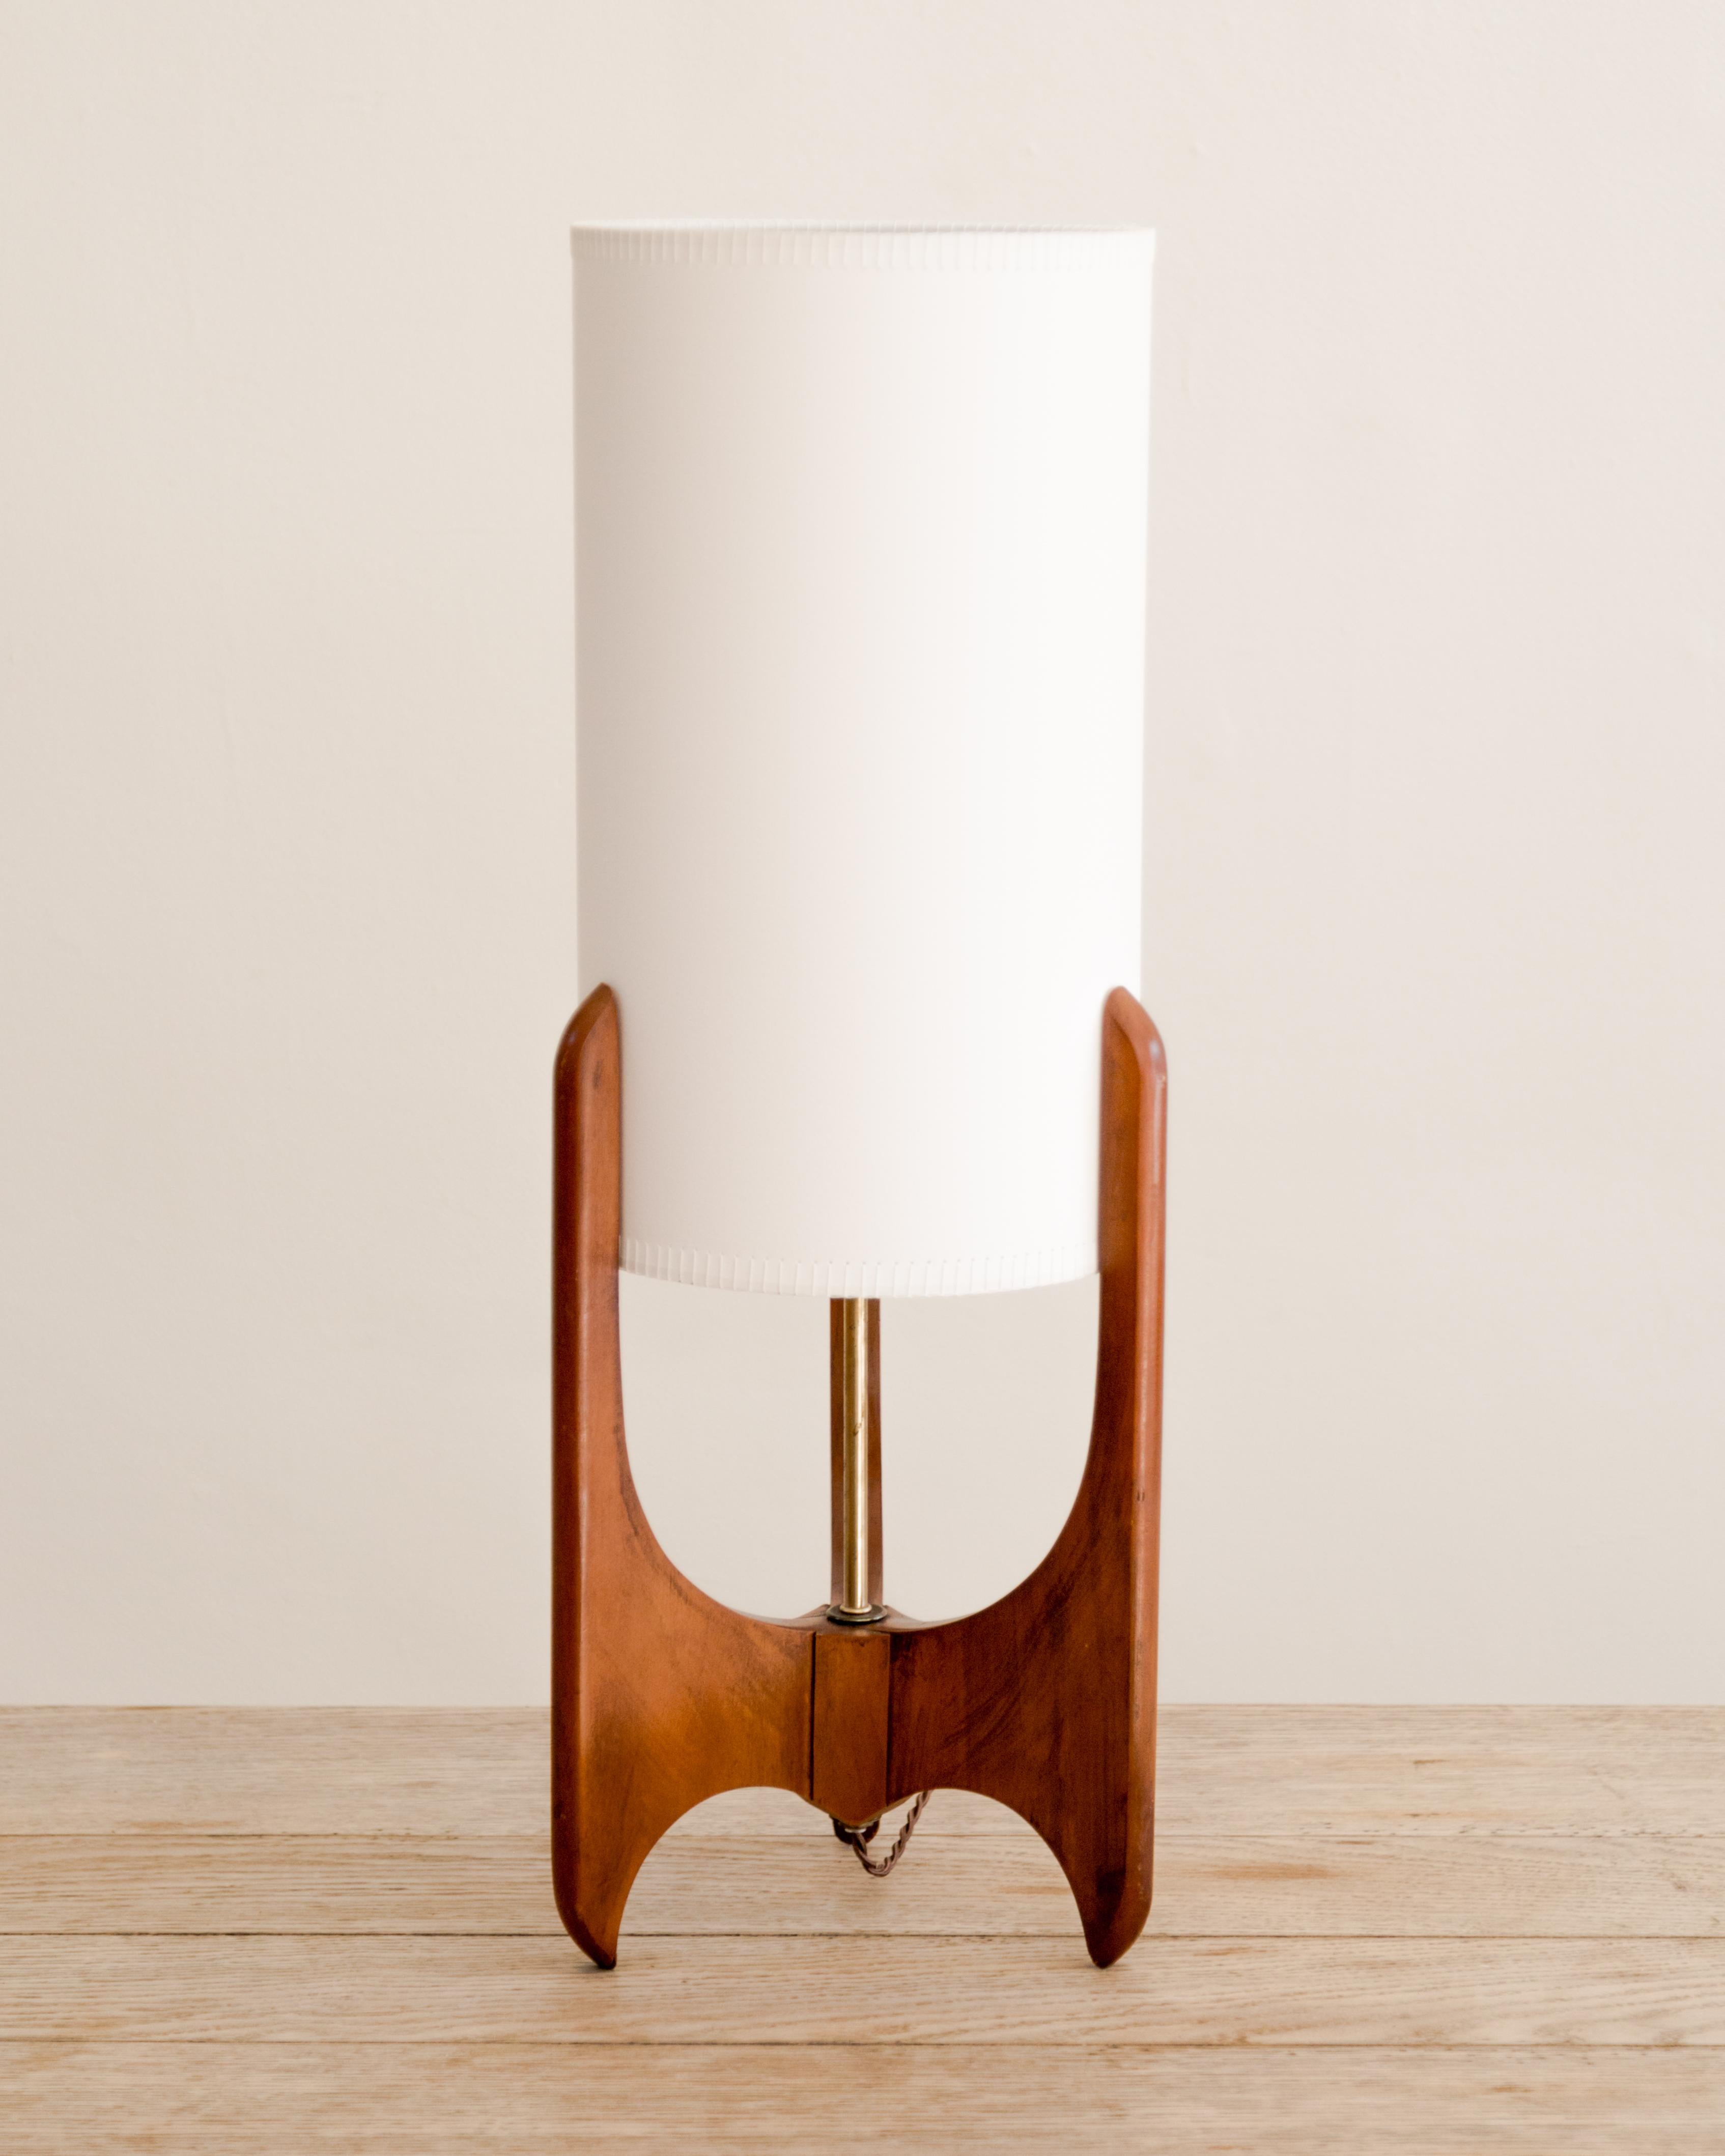 Retro American table lamp with walnut base and cylindrical artisan paper shade with whip stitching, circa 1960's.